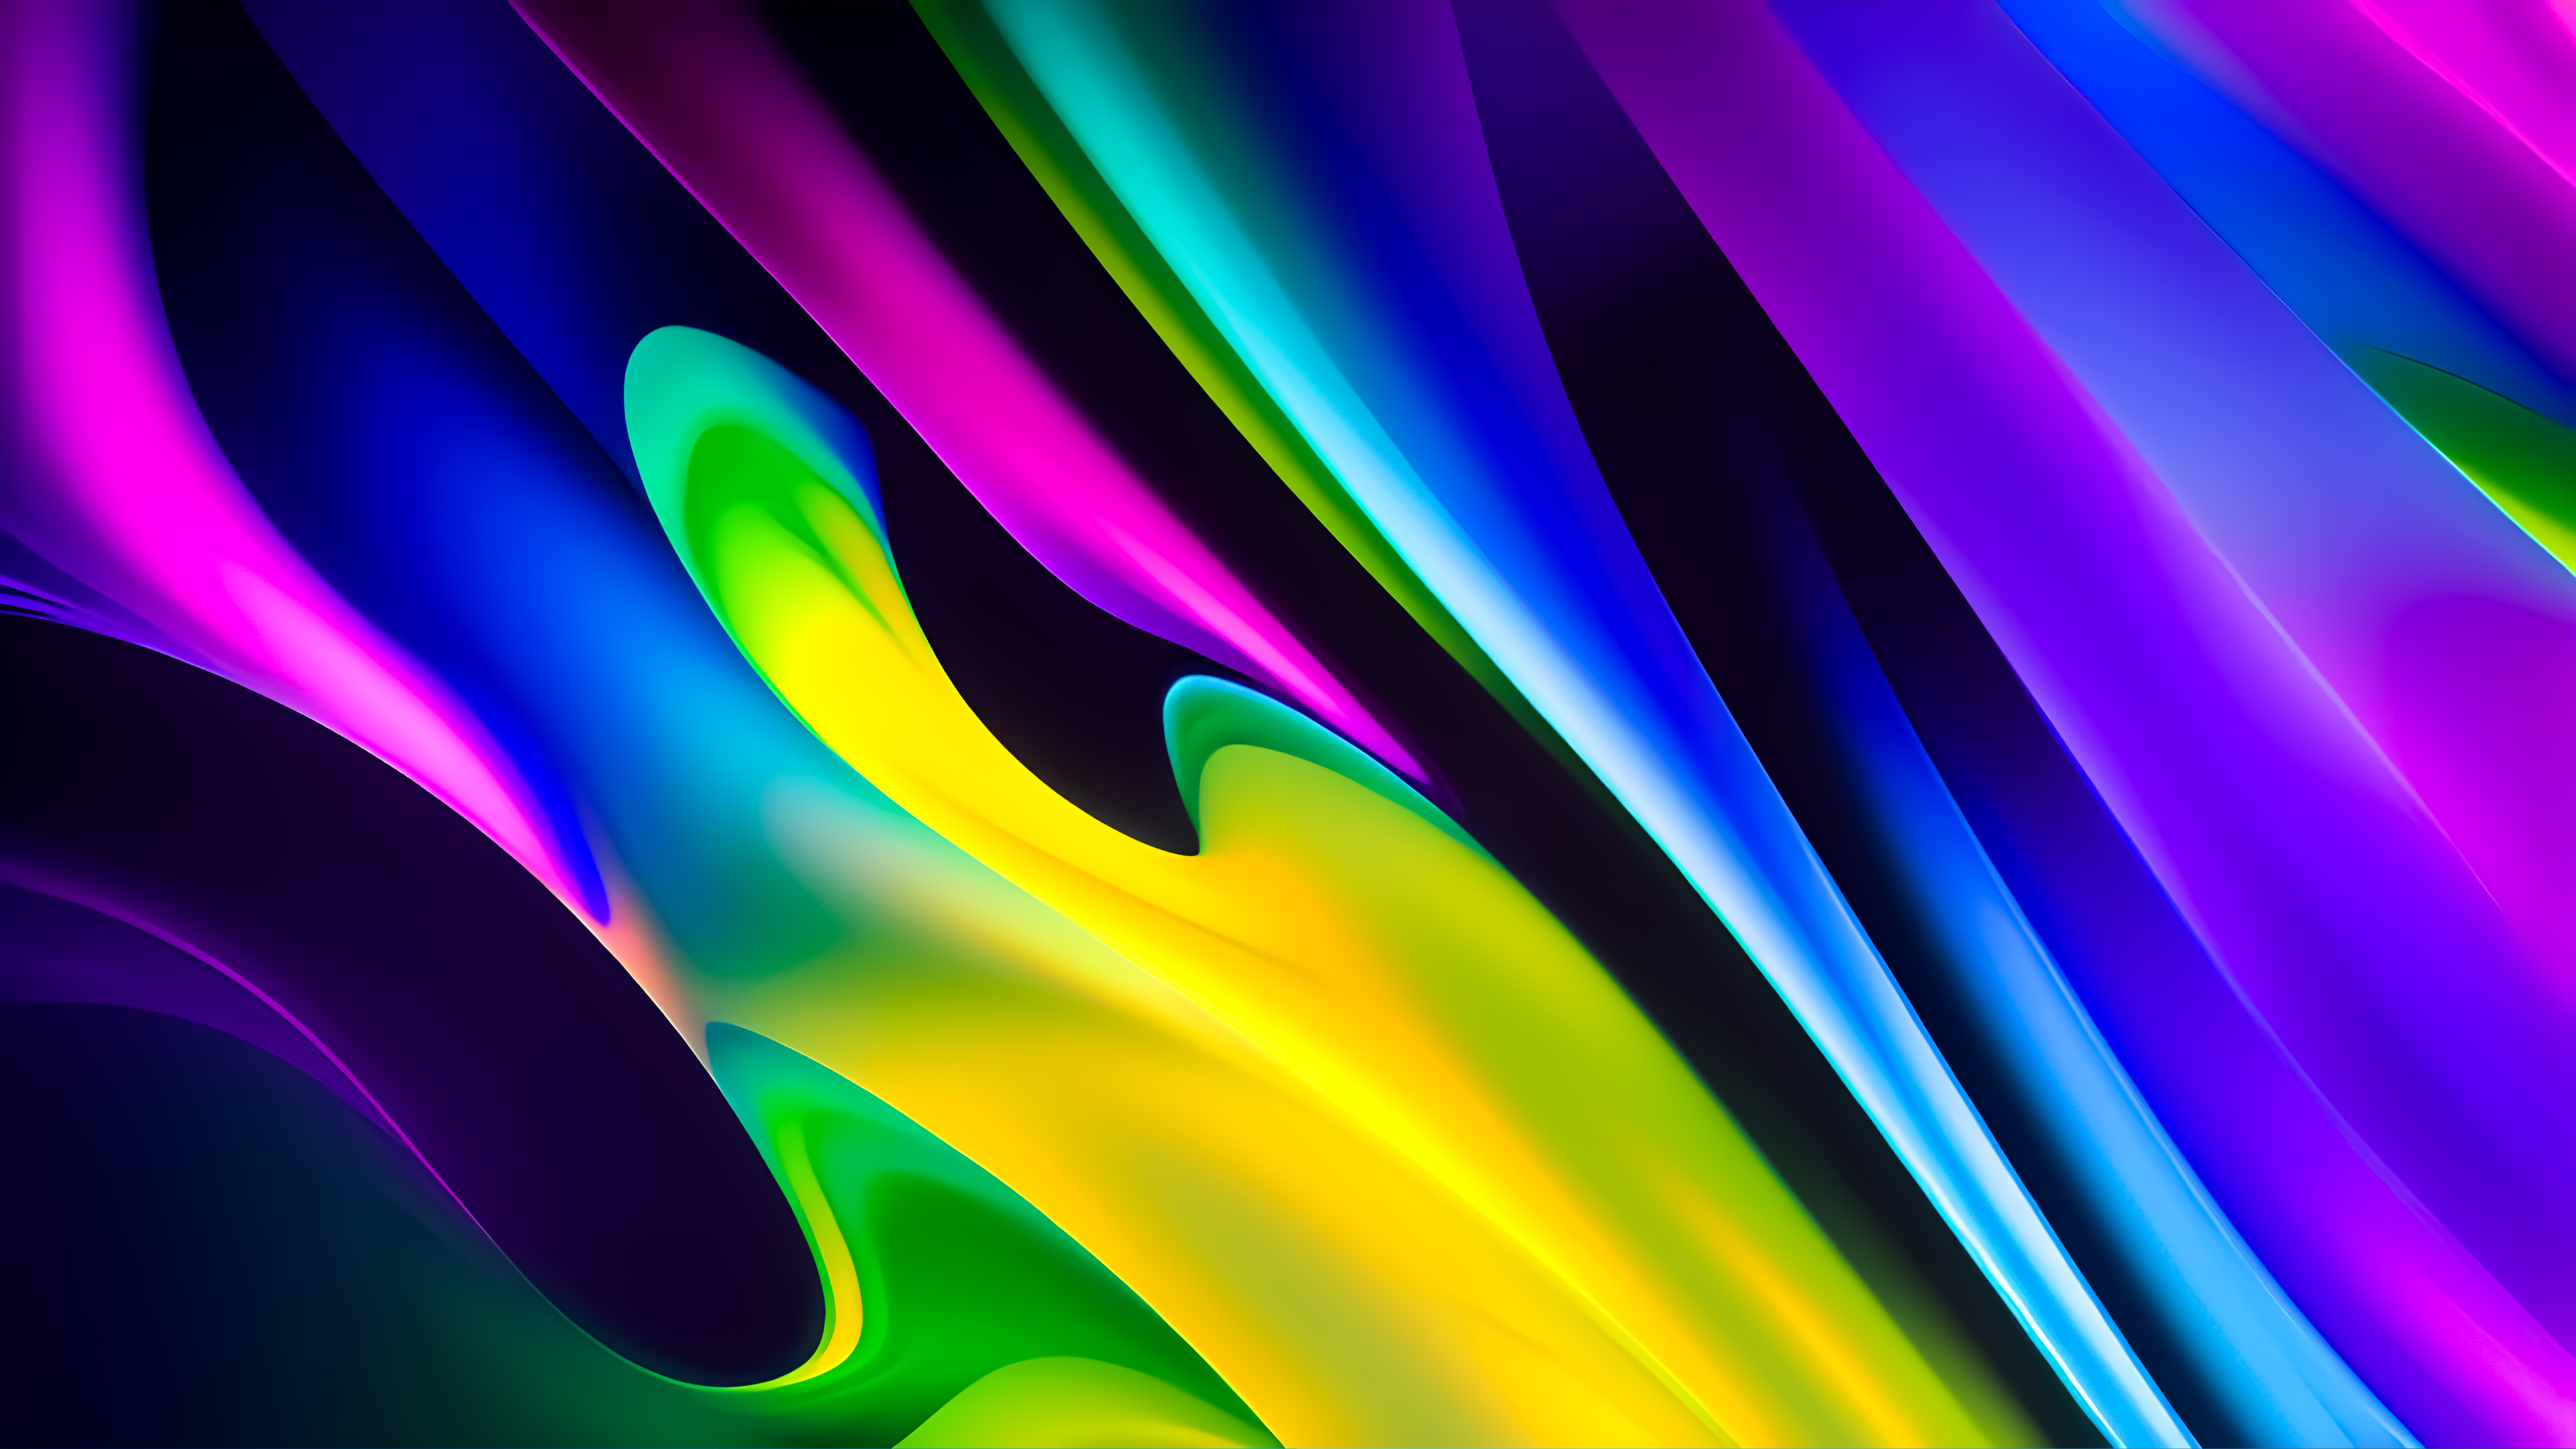 Digital Art Colorful Abstract 3840x2160